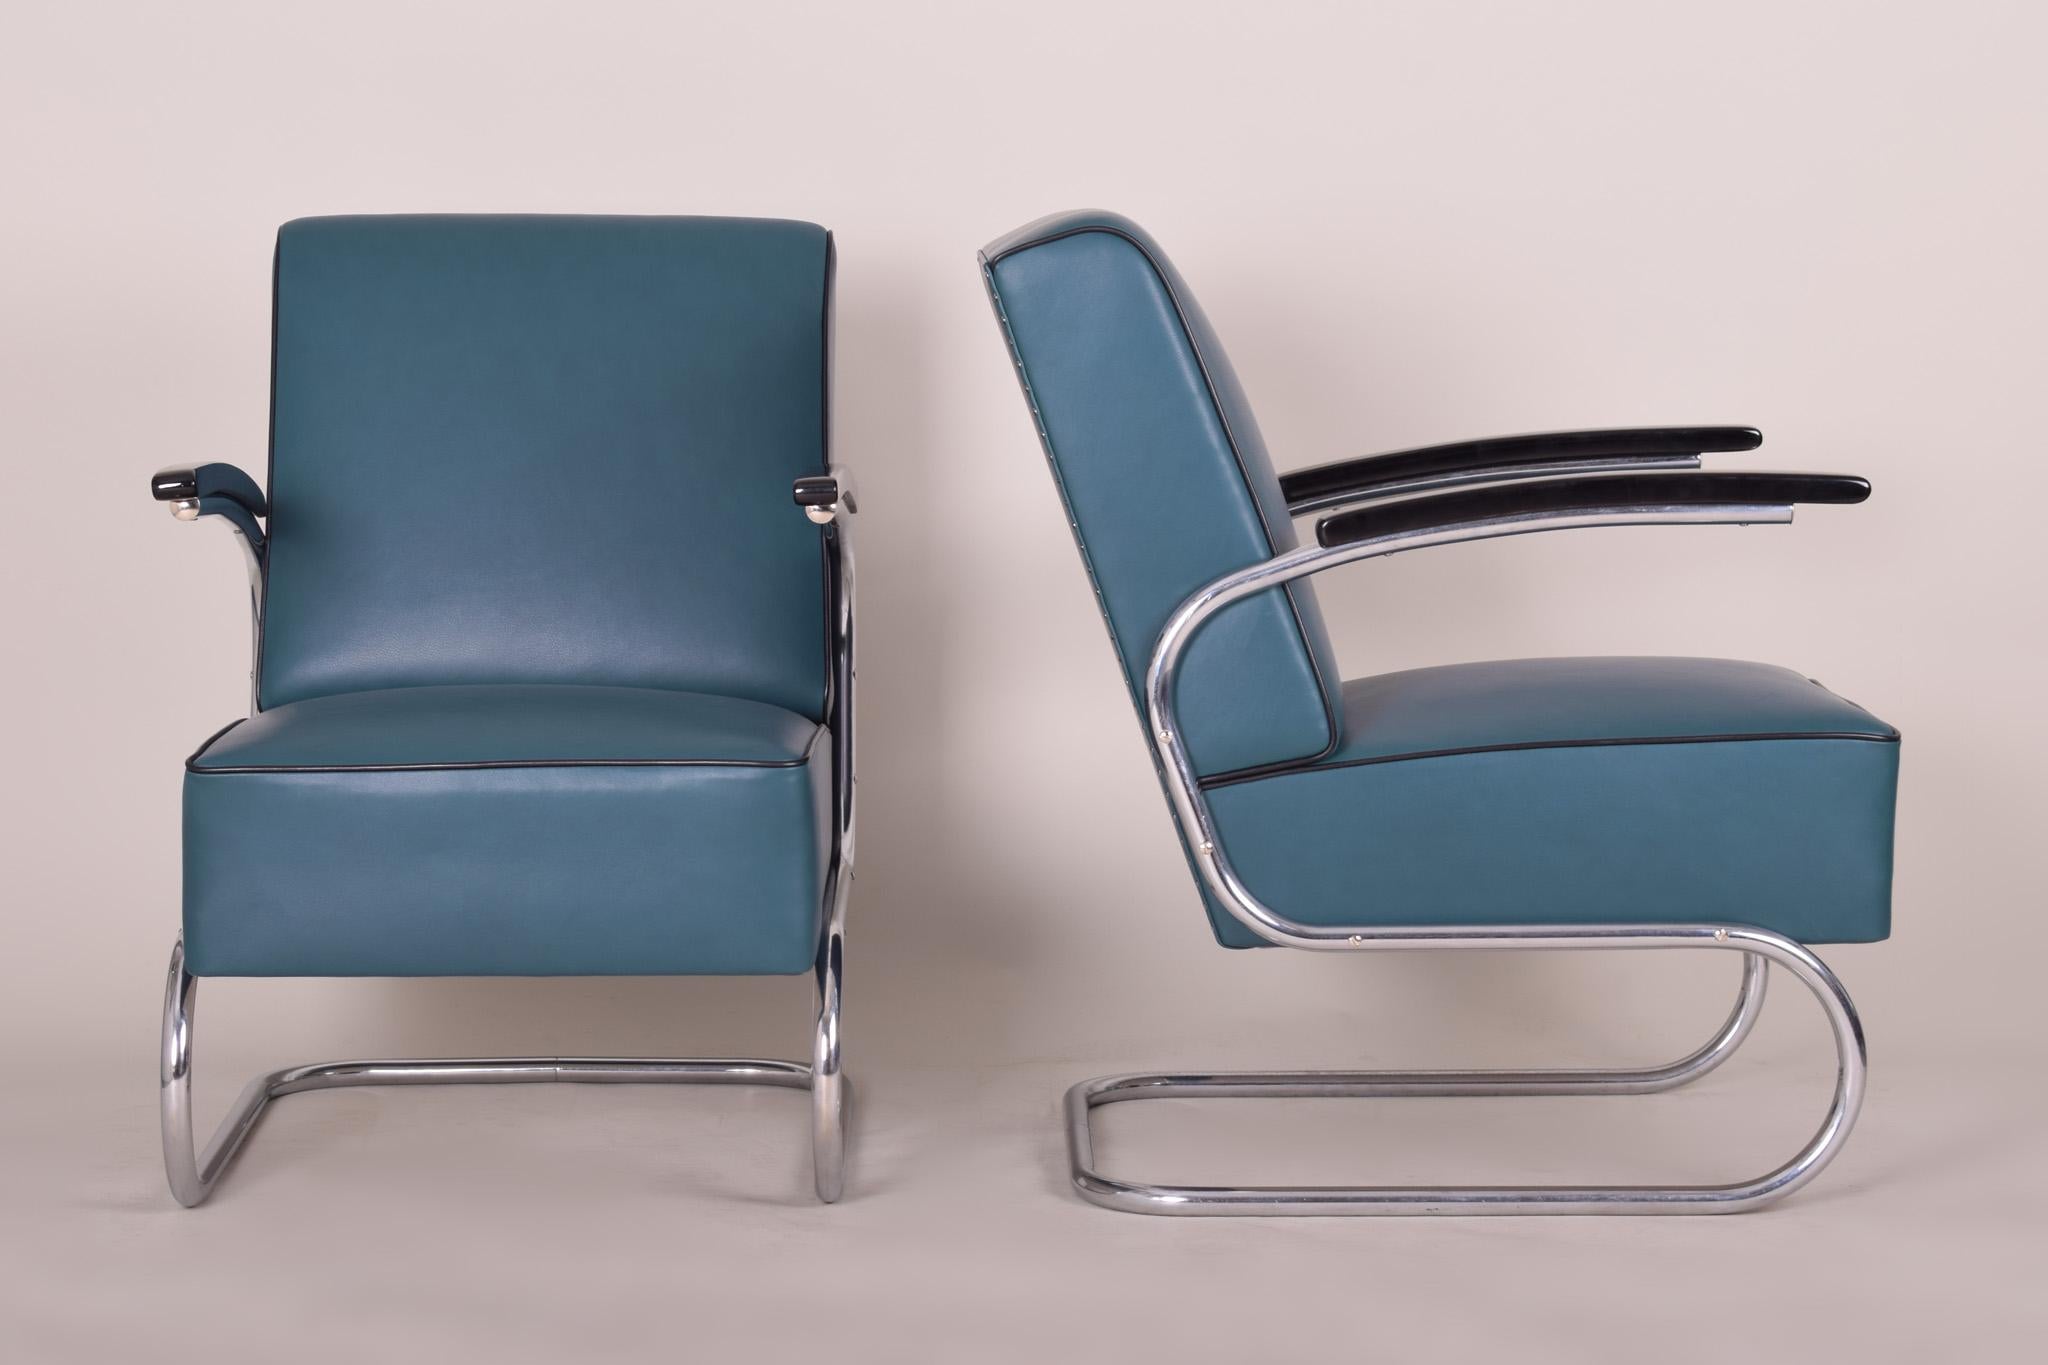 4 Tubular Steel Cantilever Armchairs in Art Deco, Chrome, New Blue Leather For Sale 2